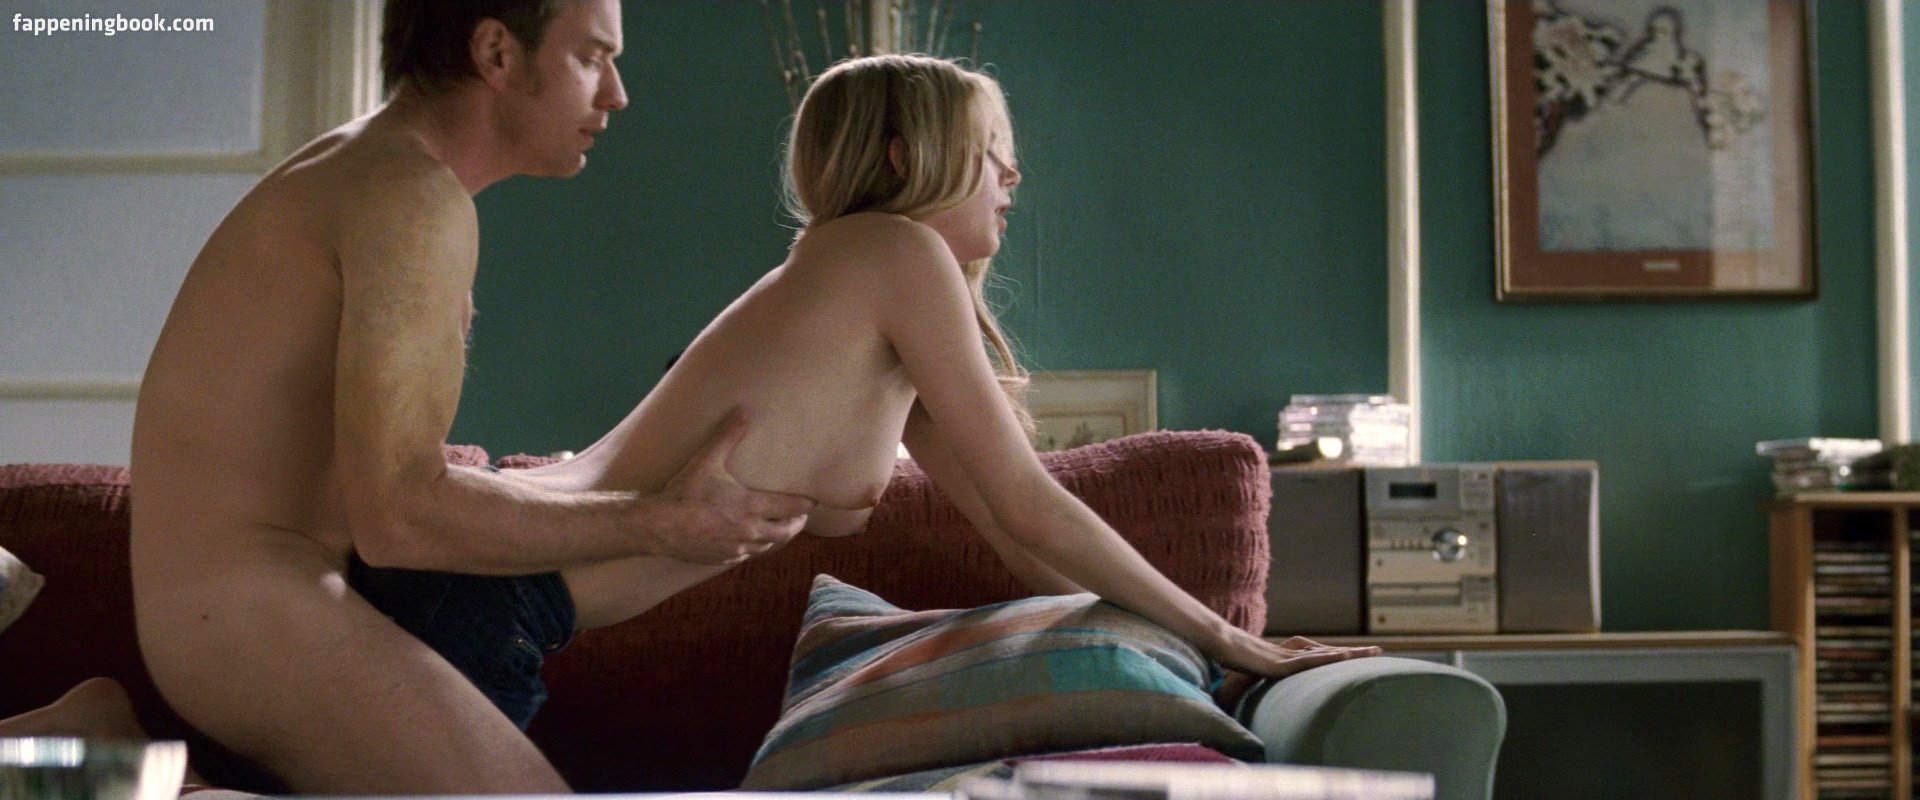 Naked michelle williams